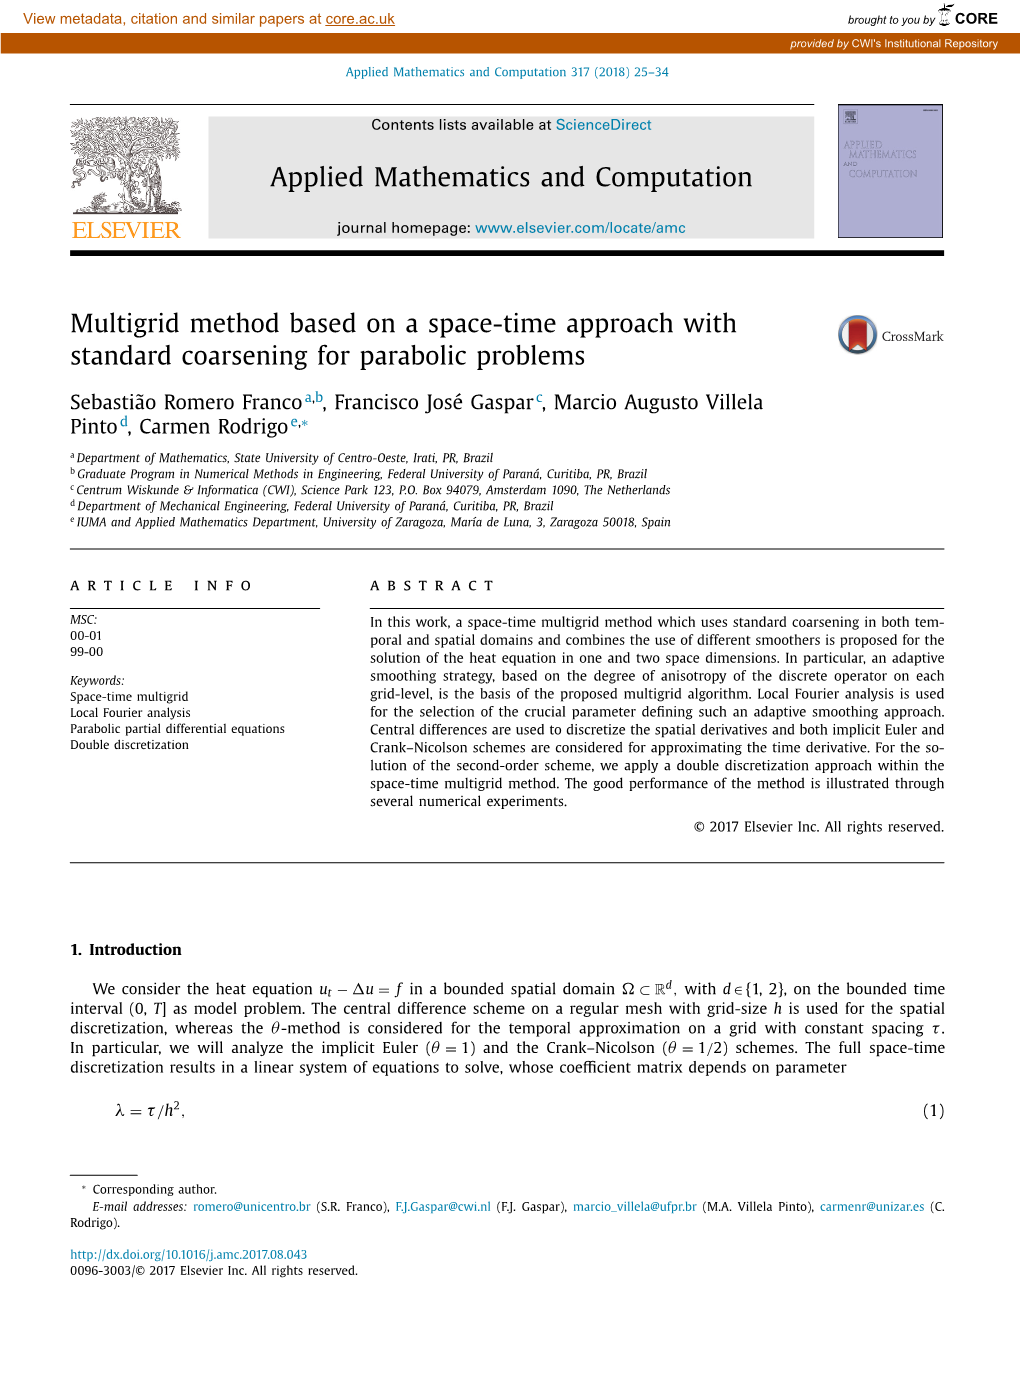 Multigrid Method Based on a Space-Time Approach with Standard Coarsening for Parabolic Problems